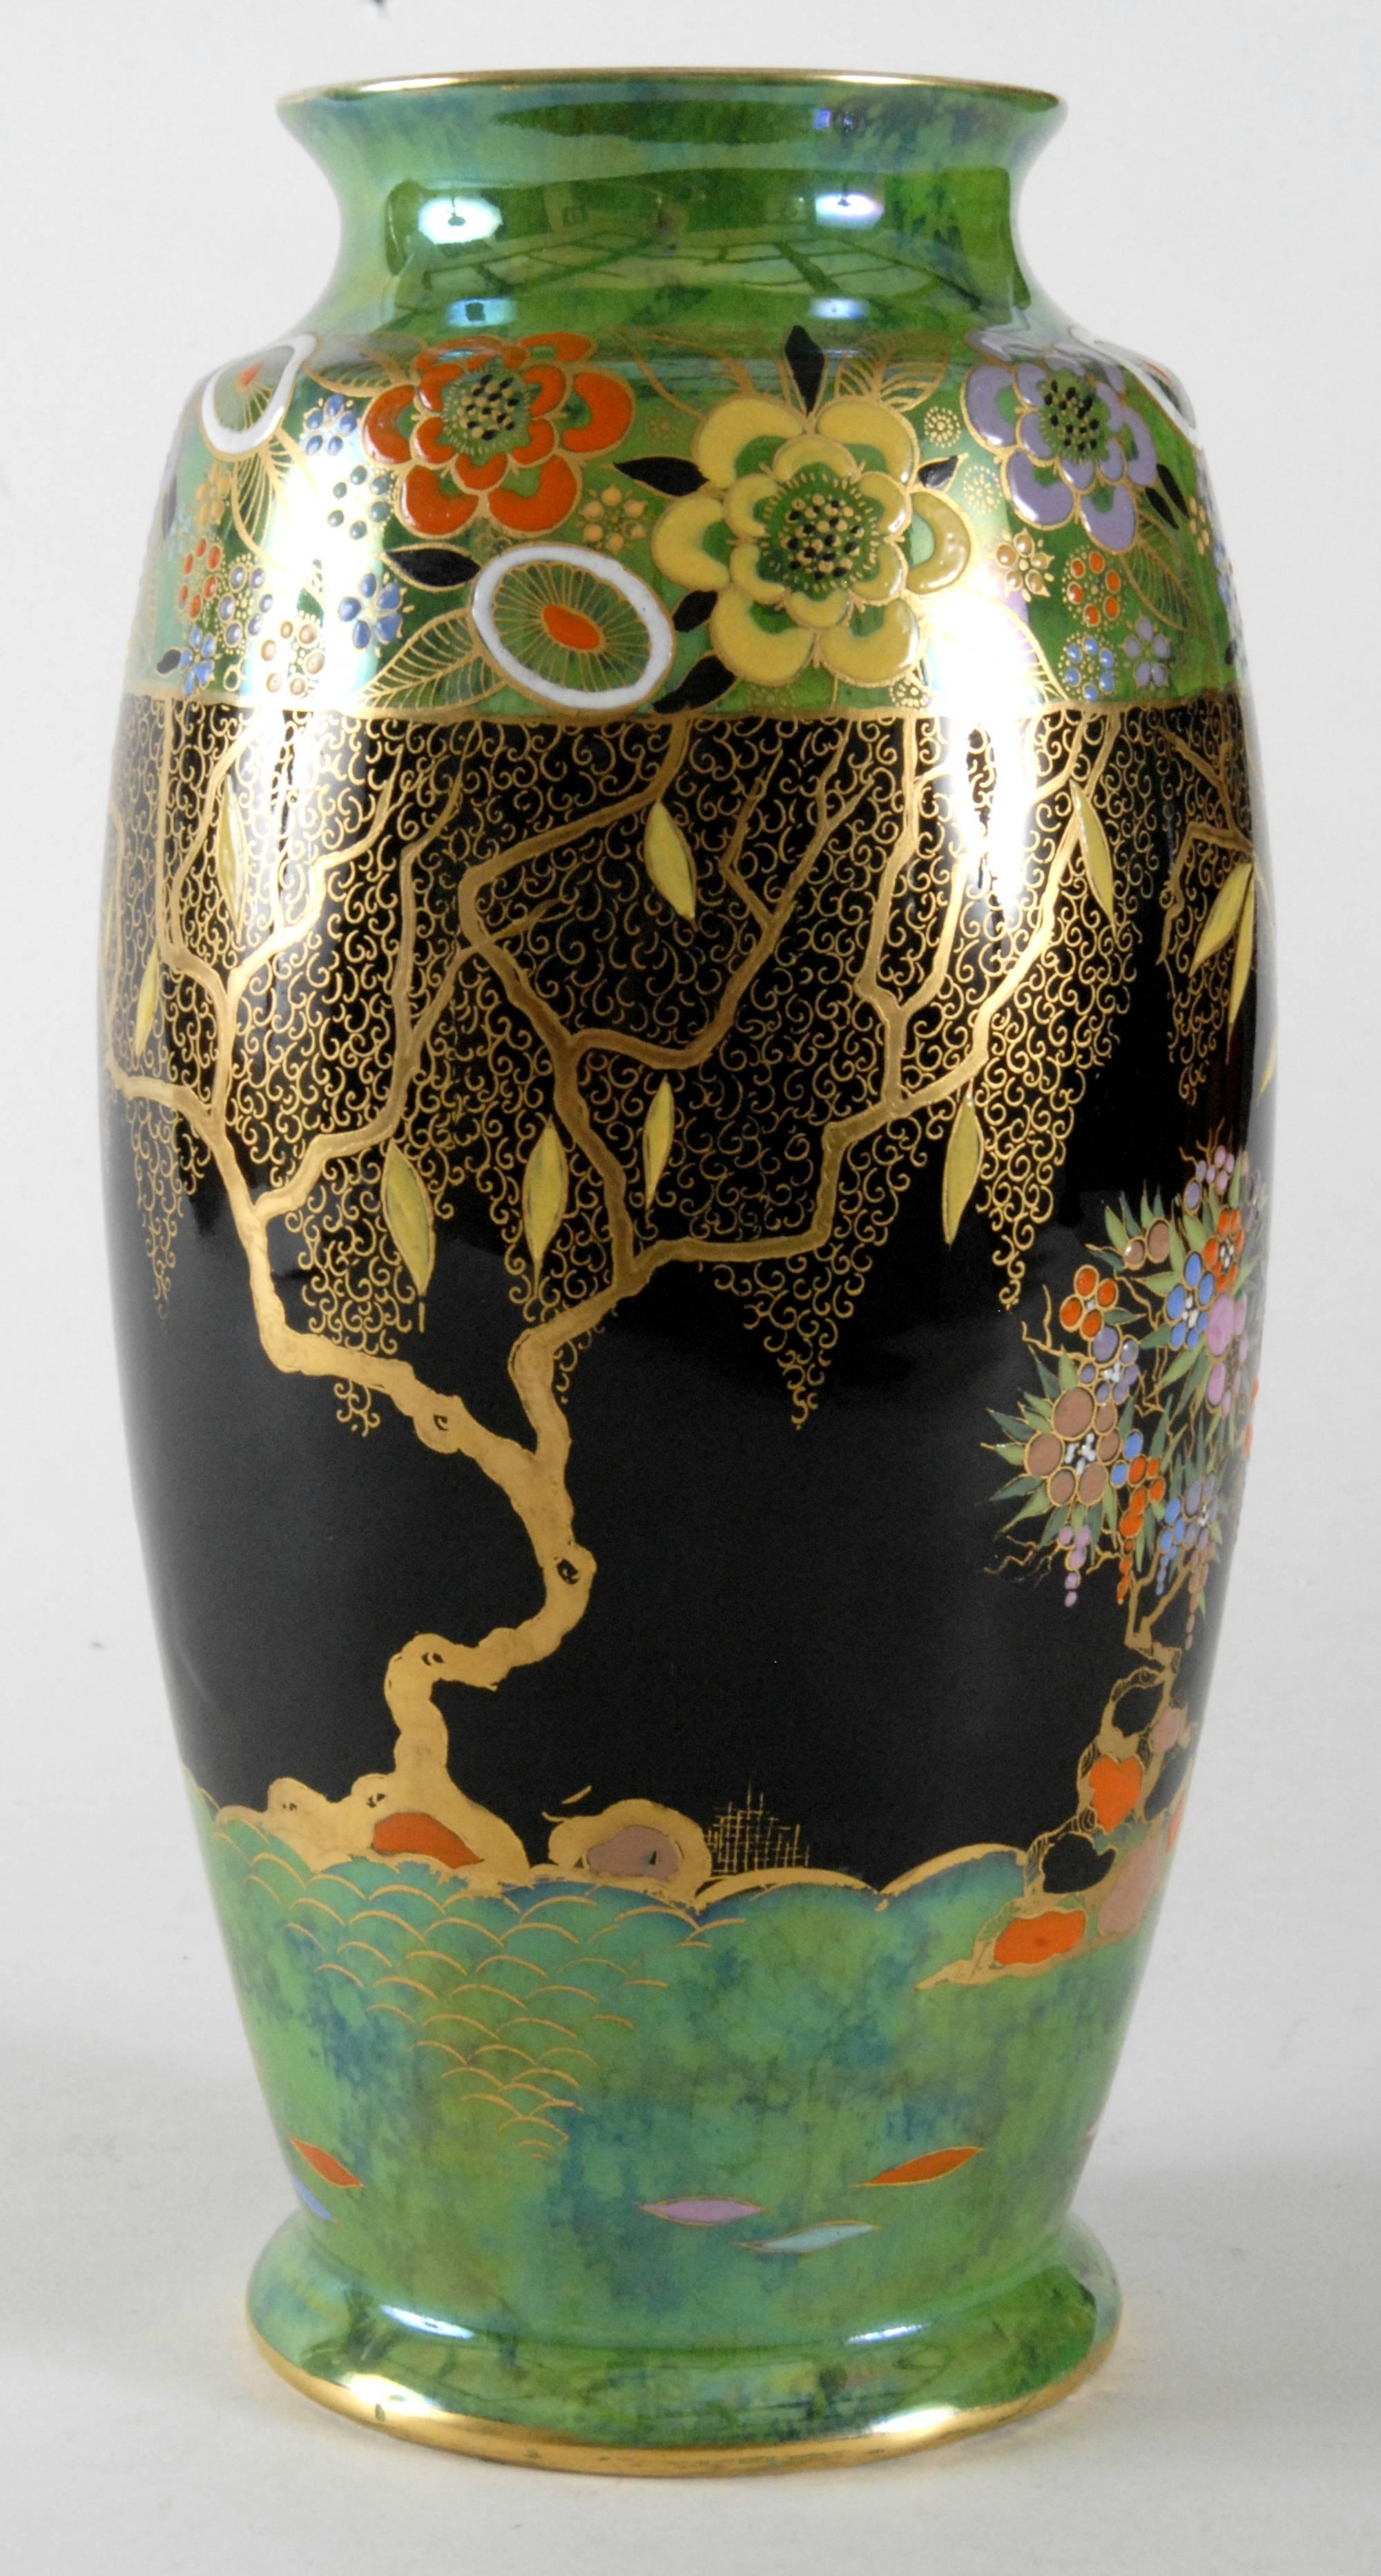 A large Carlton Ware vase from, circa1935 with the Mandarin Tree pattern with the green/black color way variation. Superbly hand painted and gilded in near excellent condition. A couple of the paint globs have come off over the years, but hardly